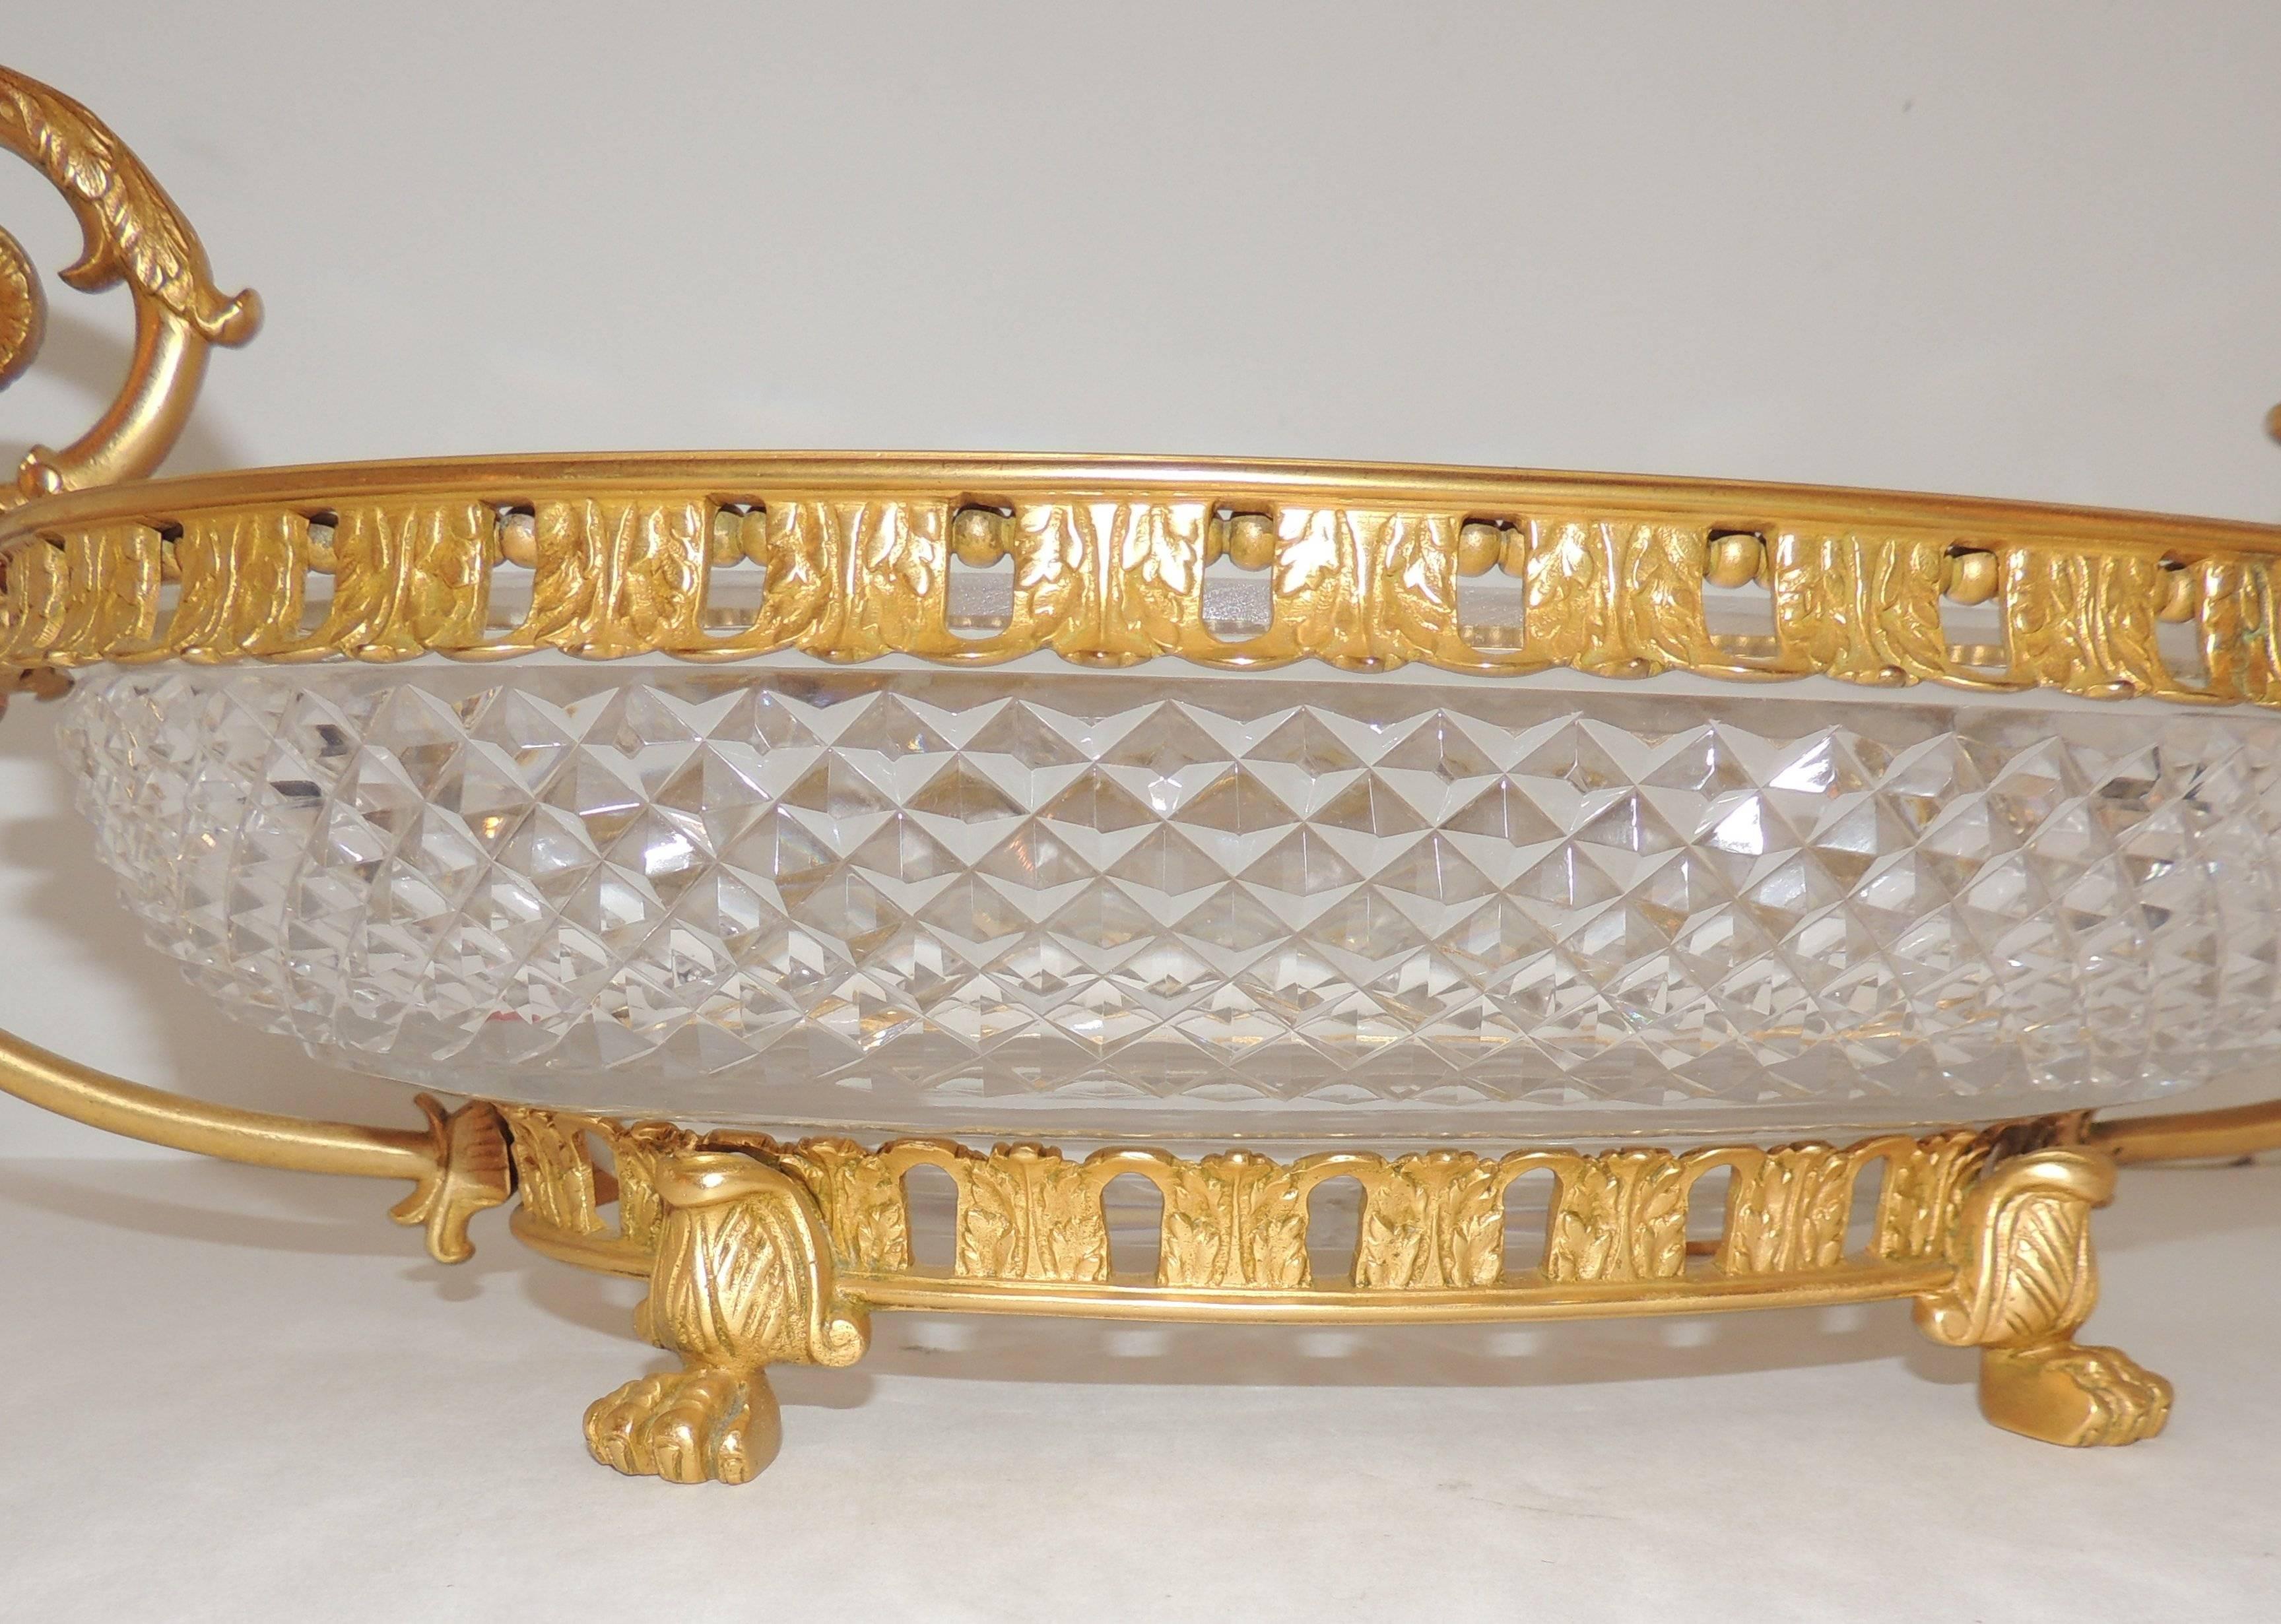 Neoclassical Wonderful French Dore Bronze and Cut Crystal Oval Centerpiece Lions Feet Handles